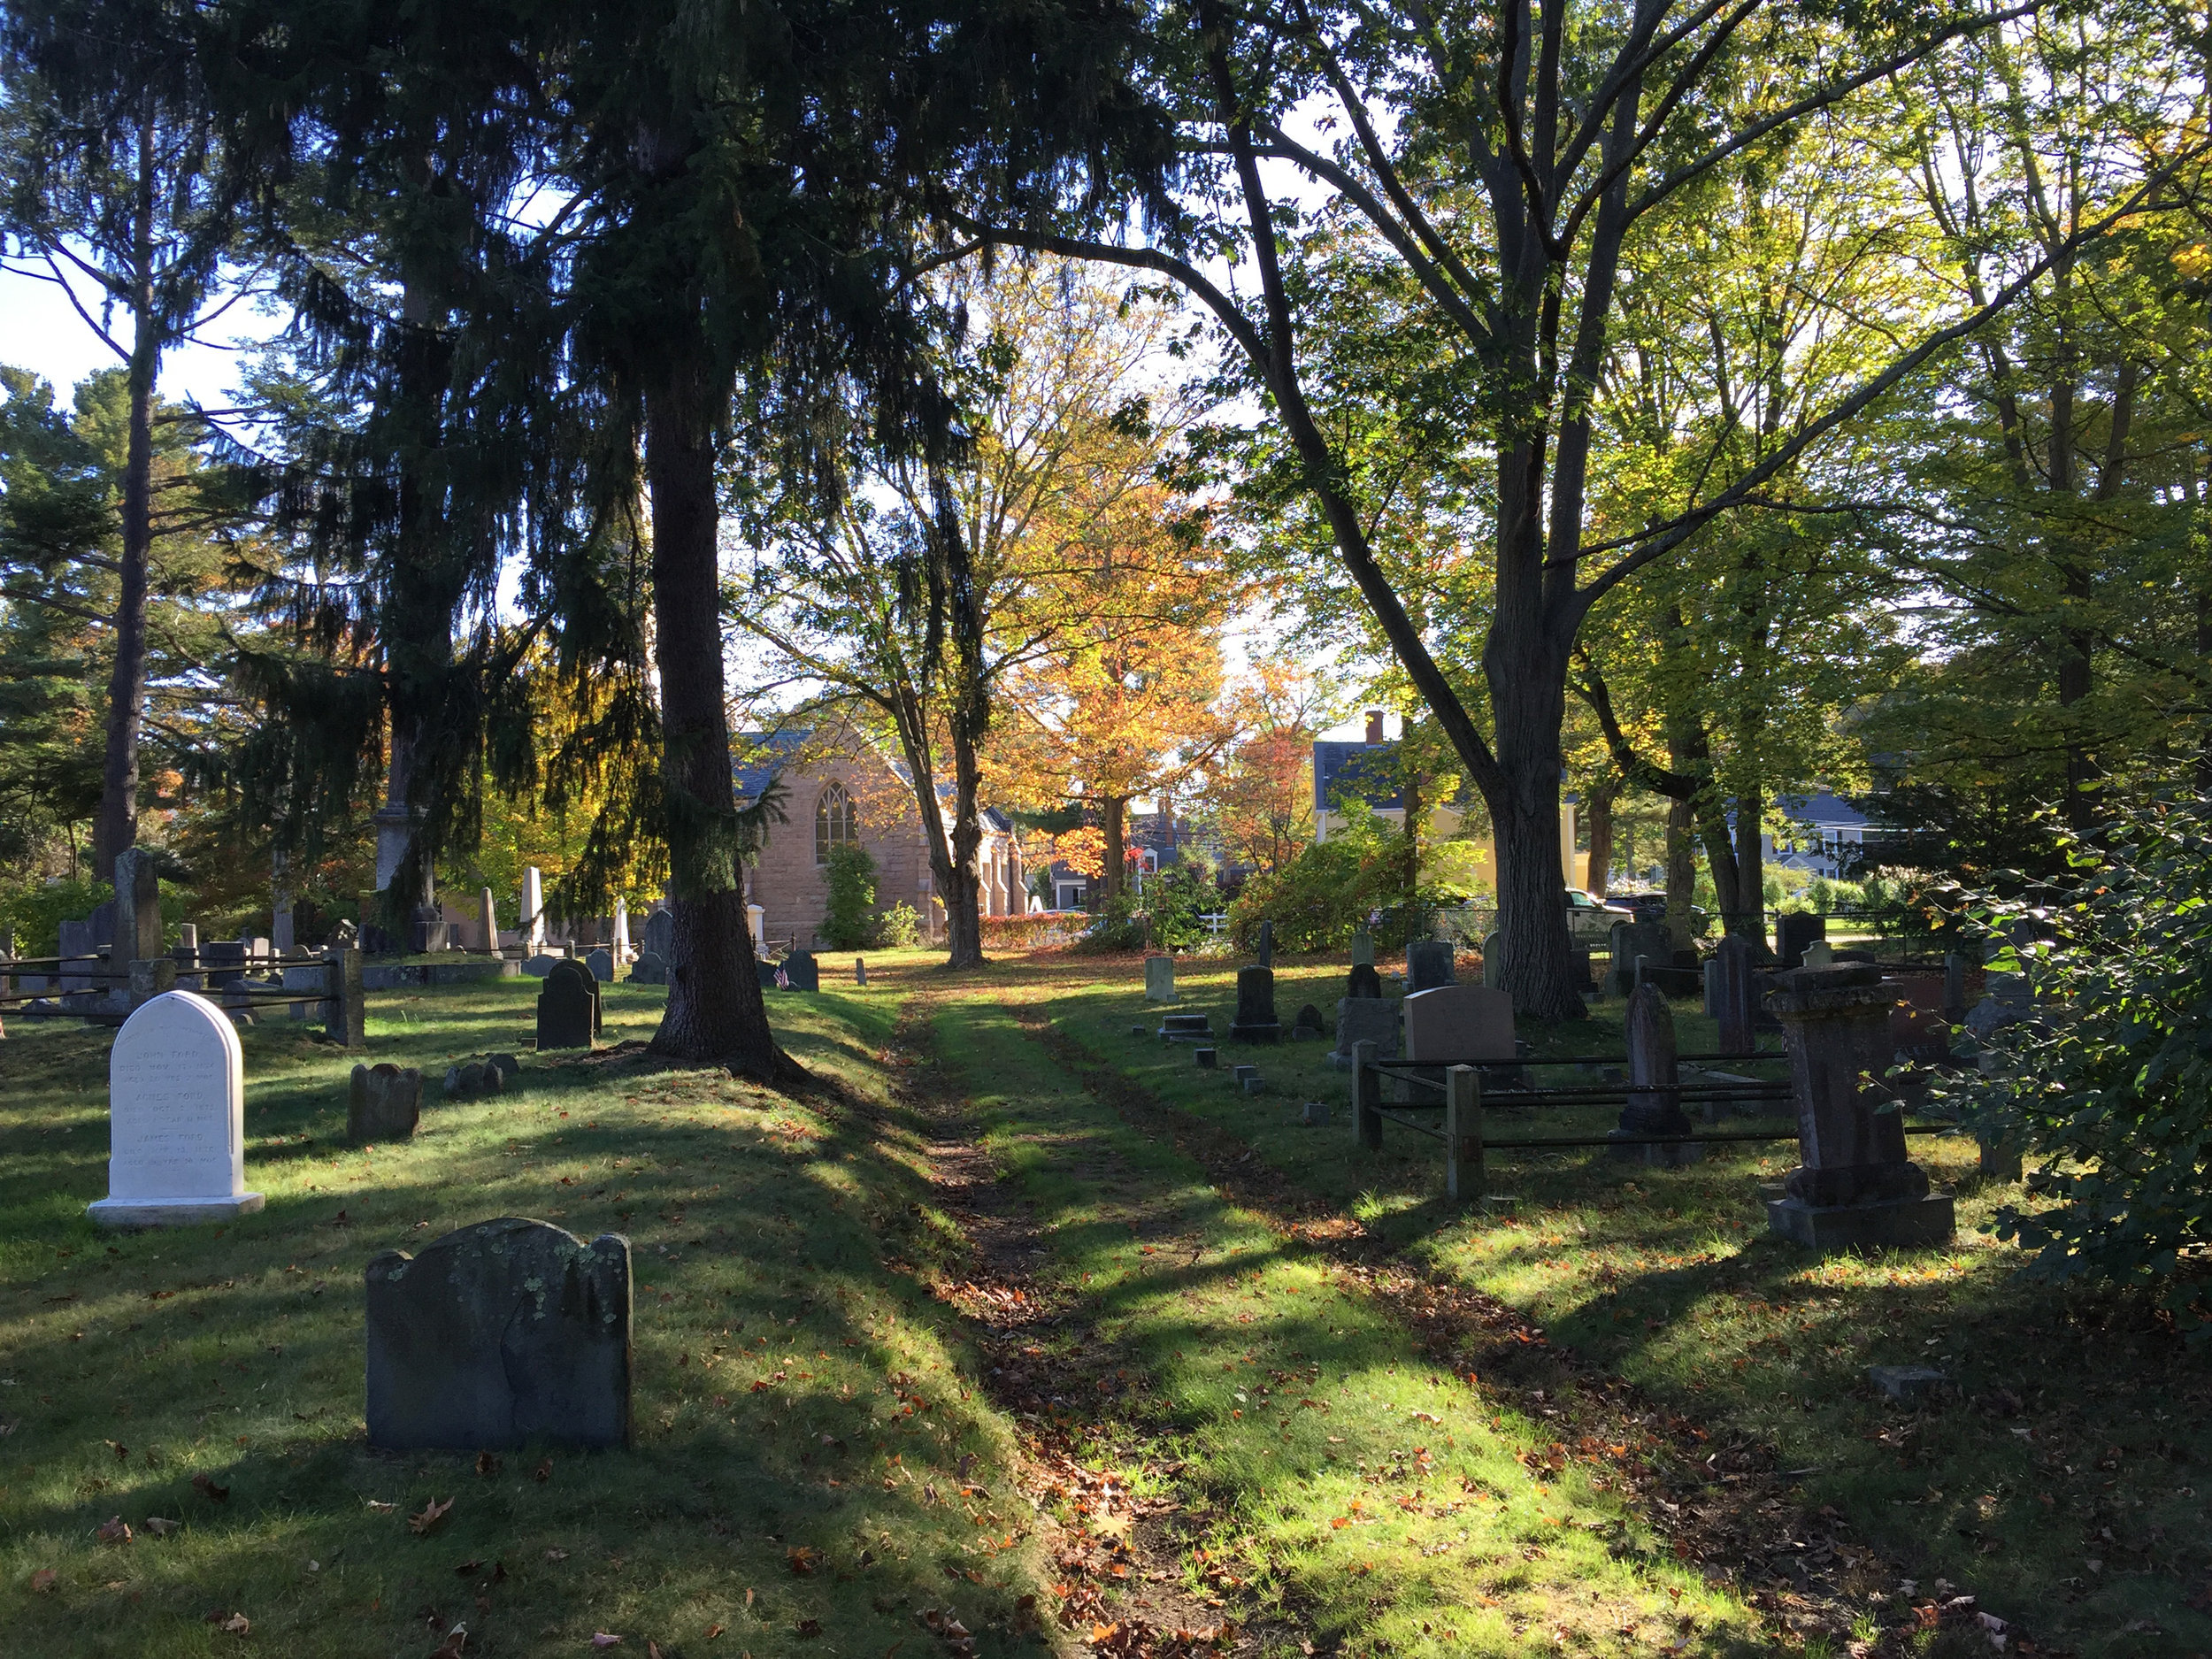  View of Old Village Cemetery in Dedham, MA 